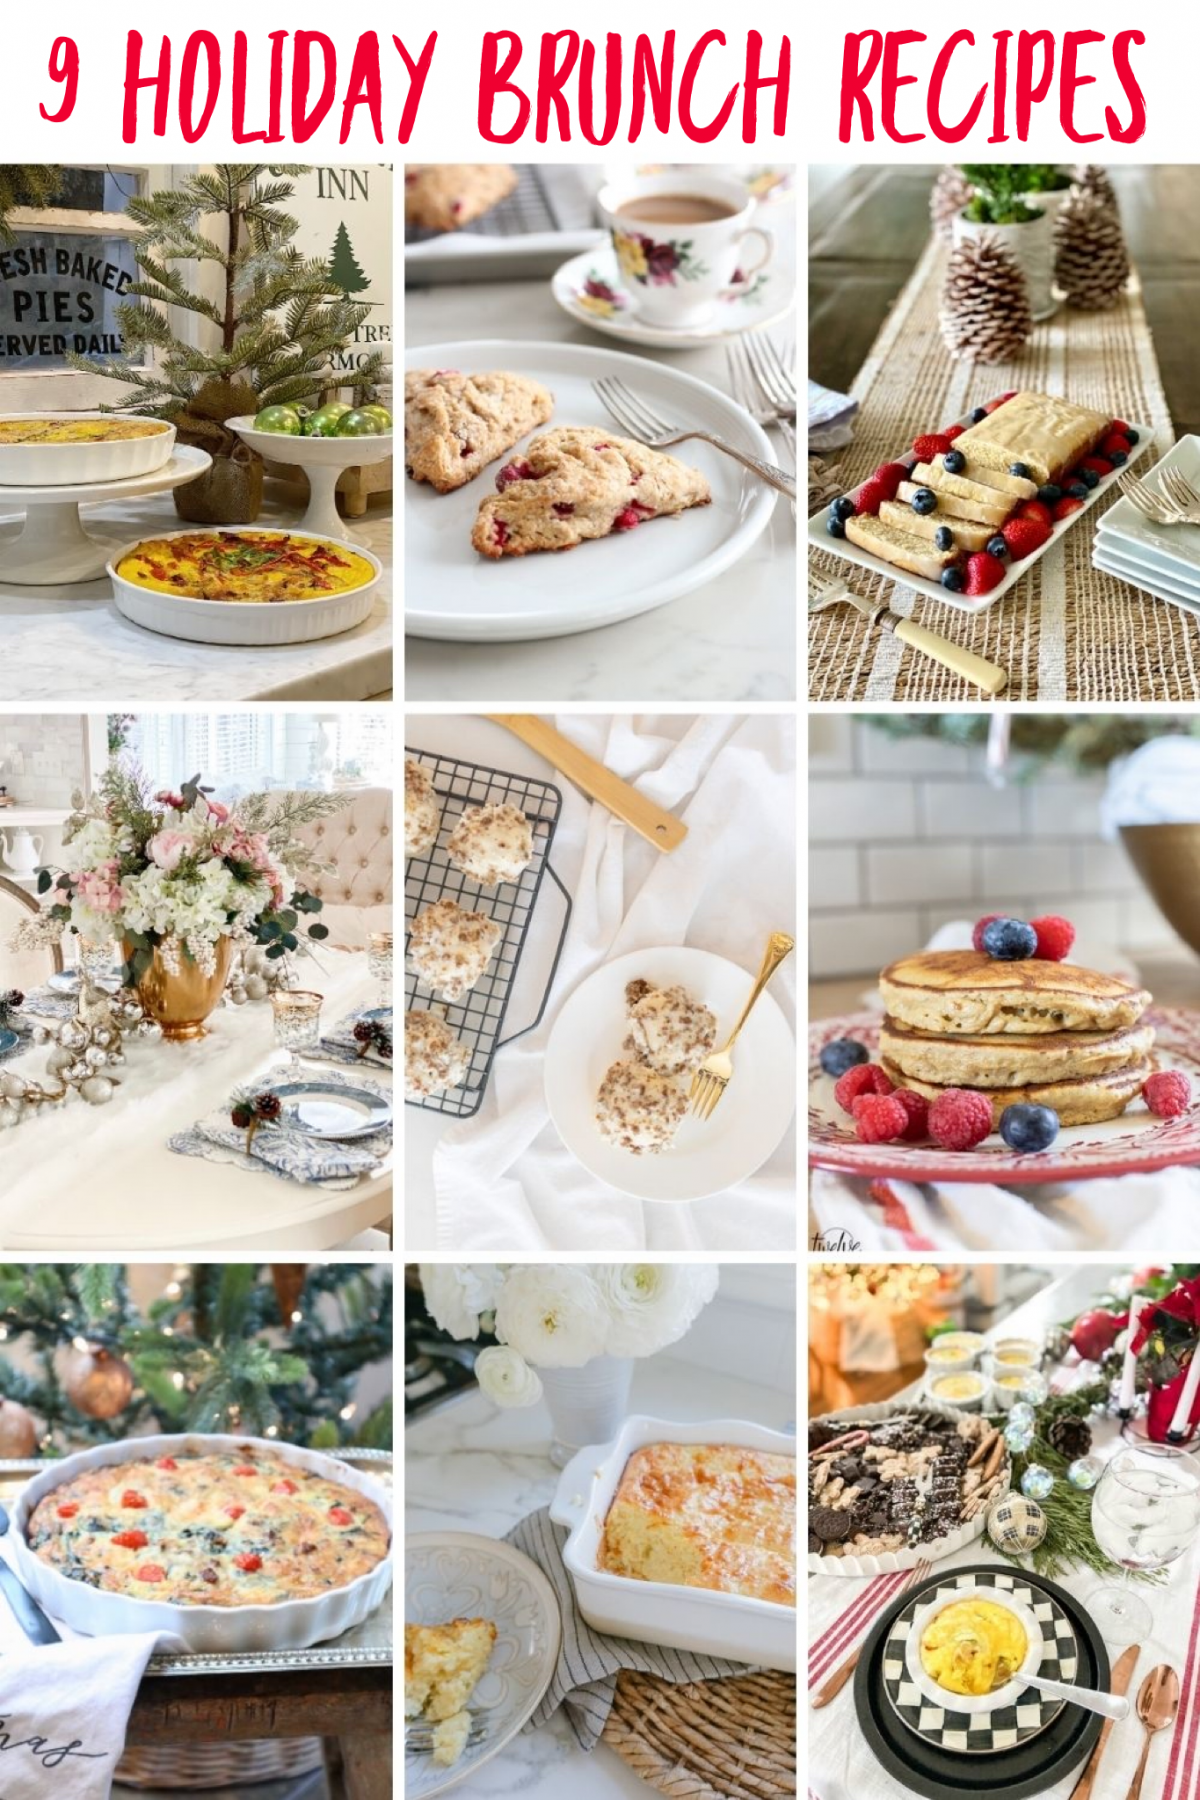 Now that our Christmas Dining Table is set, I am excited to share with you some amazing Christmas Brunch recipes for frittatas.